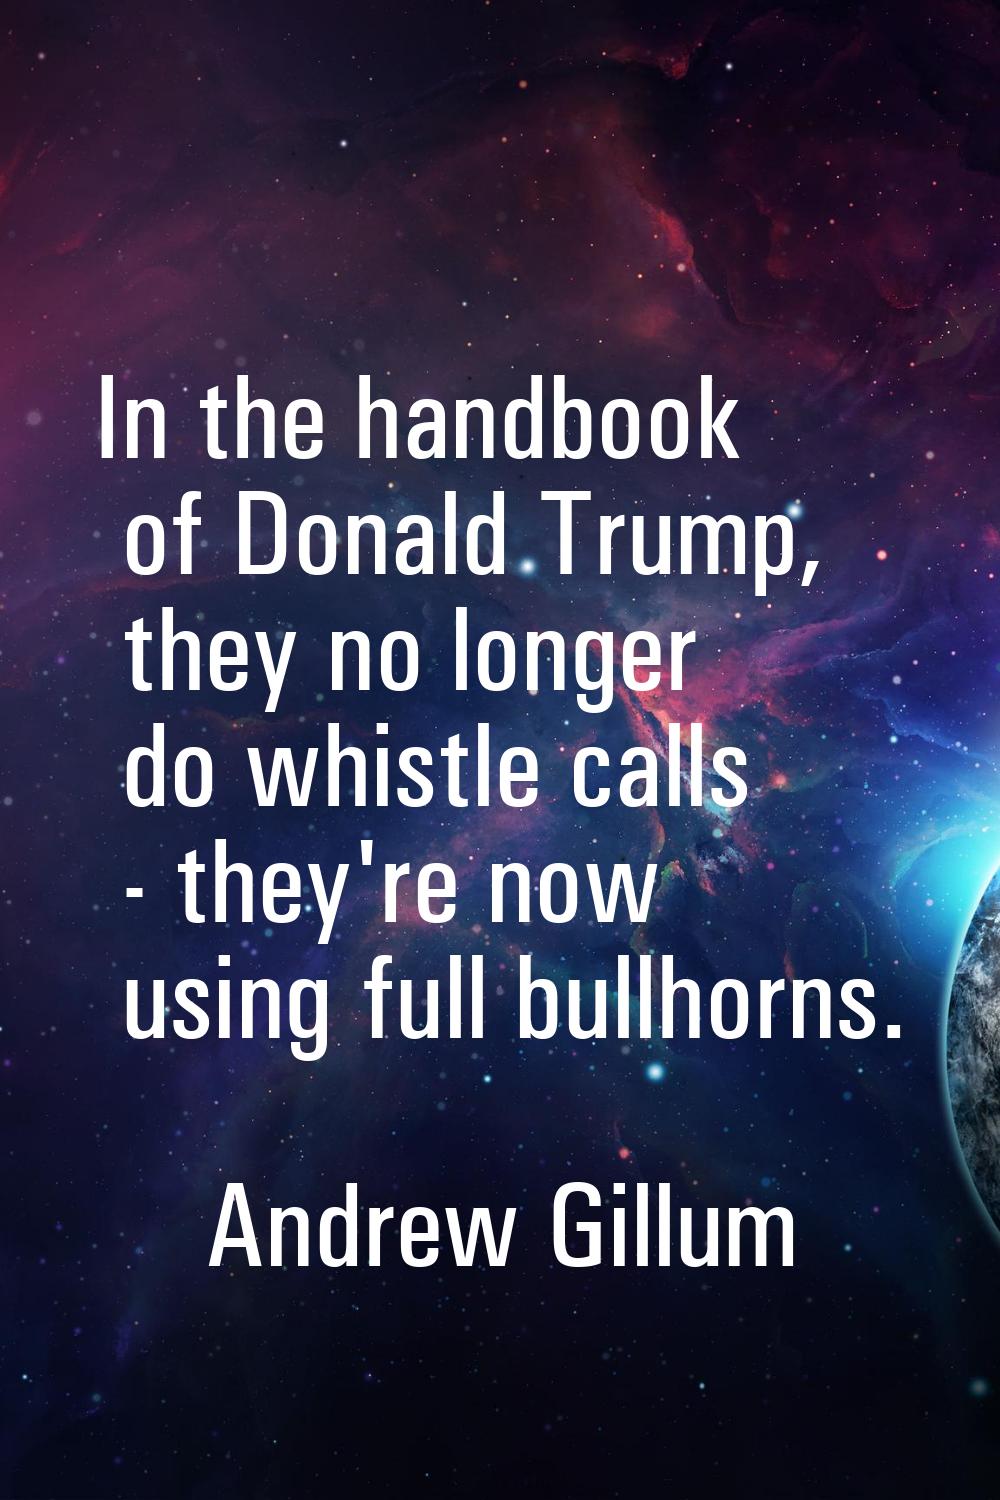 In the handbook of Donald Trump, they no longer do whistle calls - they're now using full bullhorns